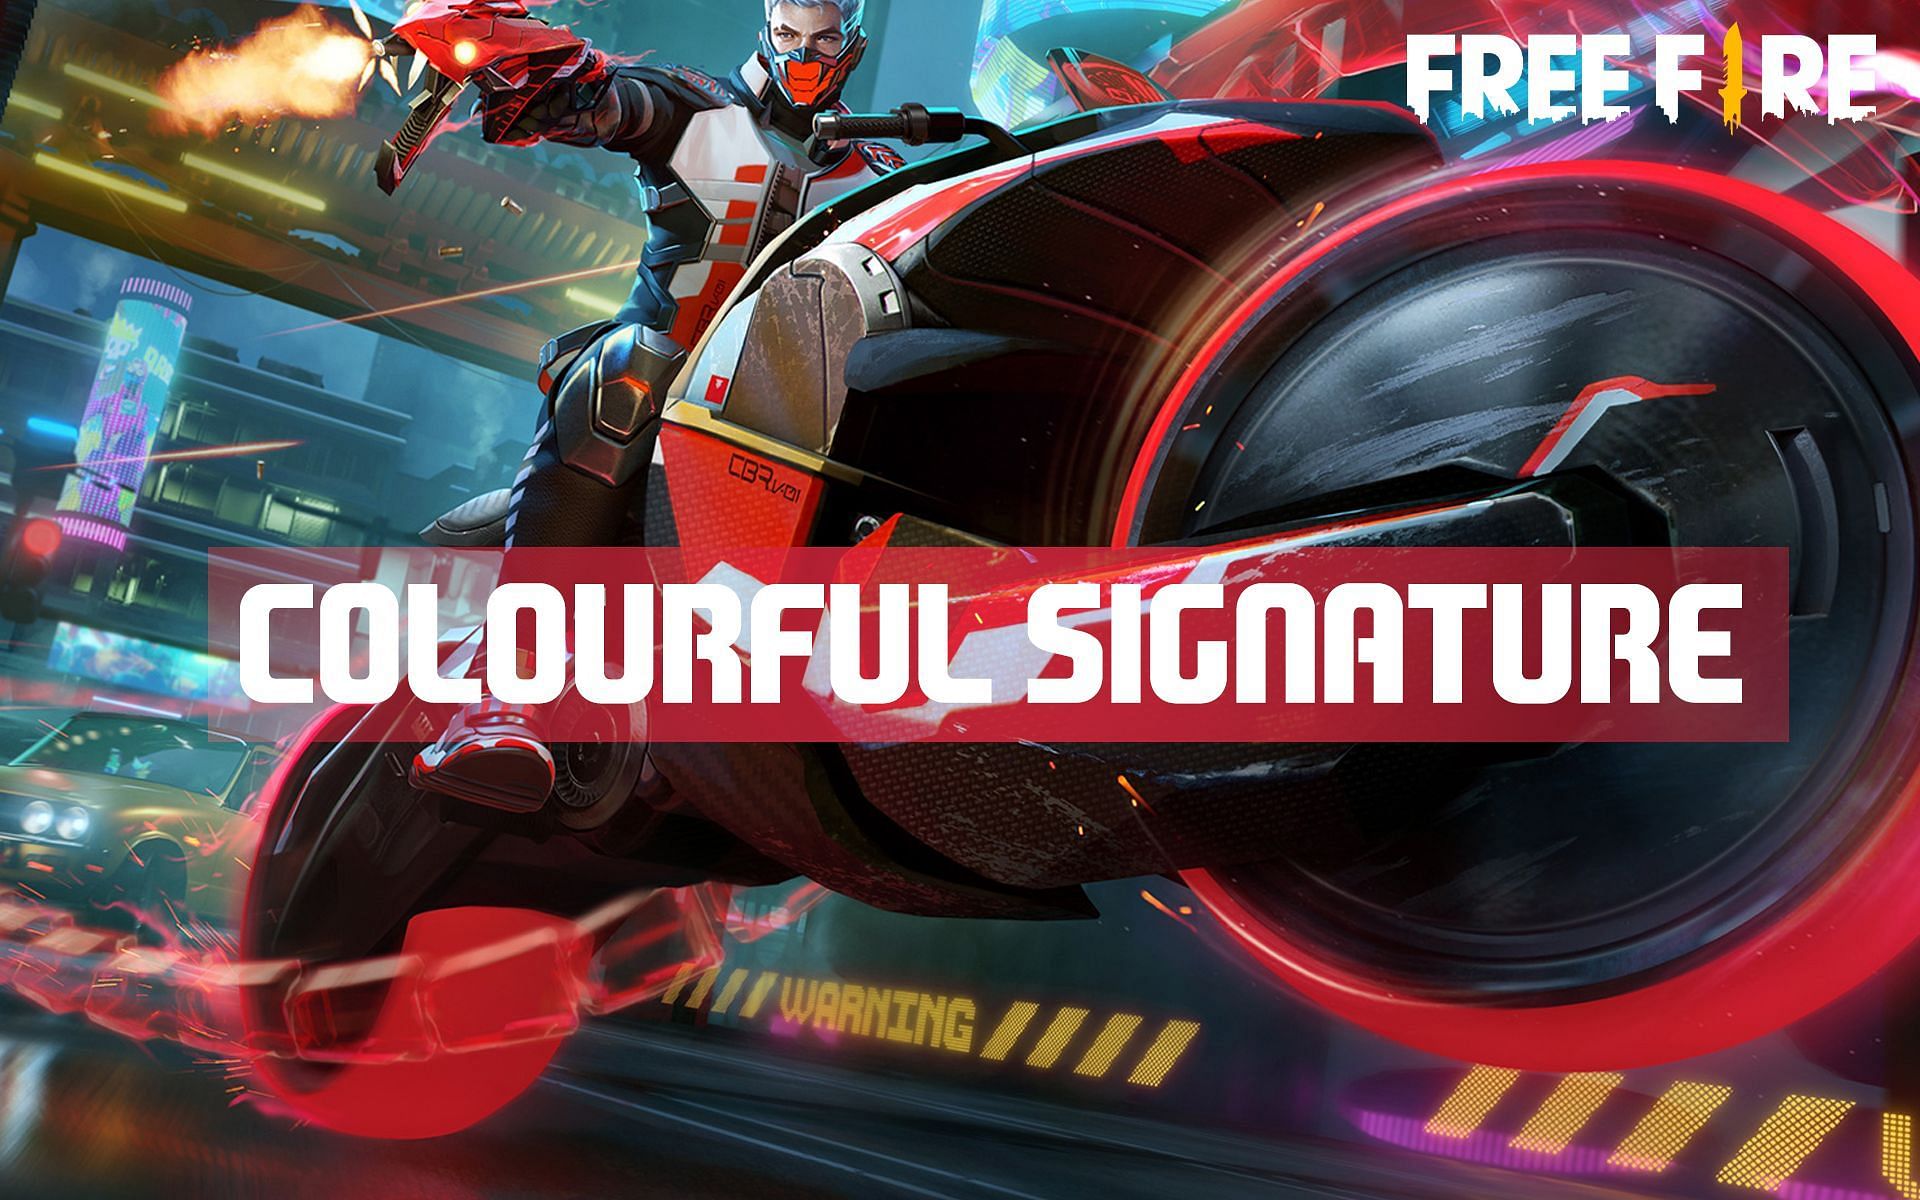 Players can make their Free Fire signatures colourful (Image via Sportskeeda)